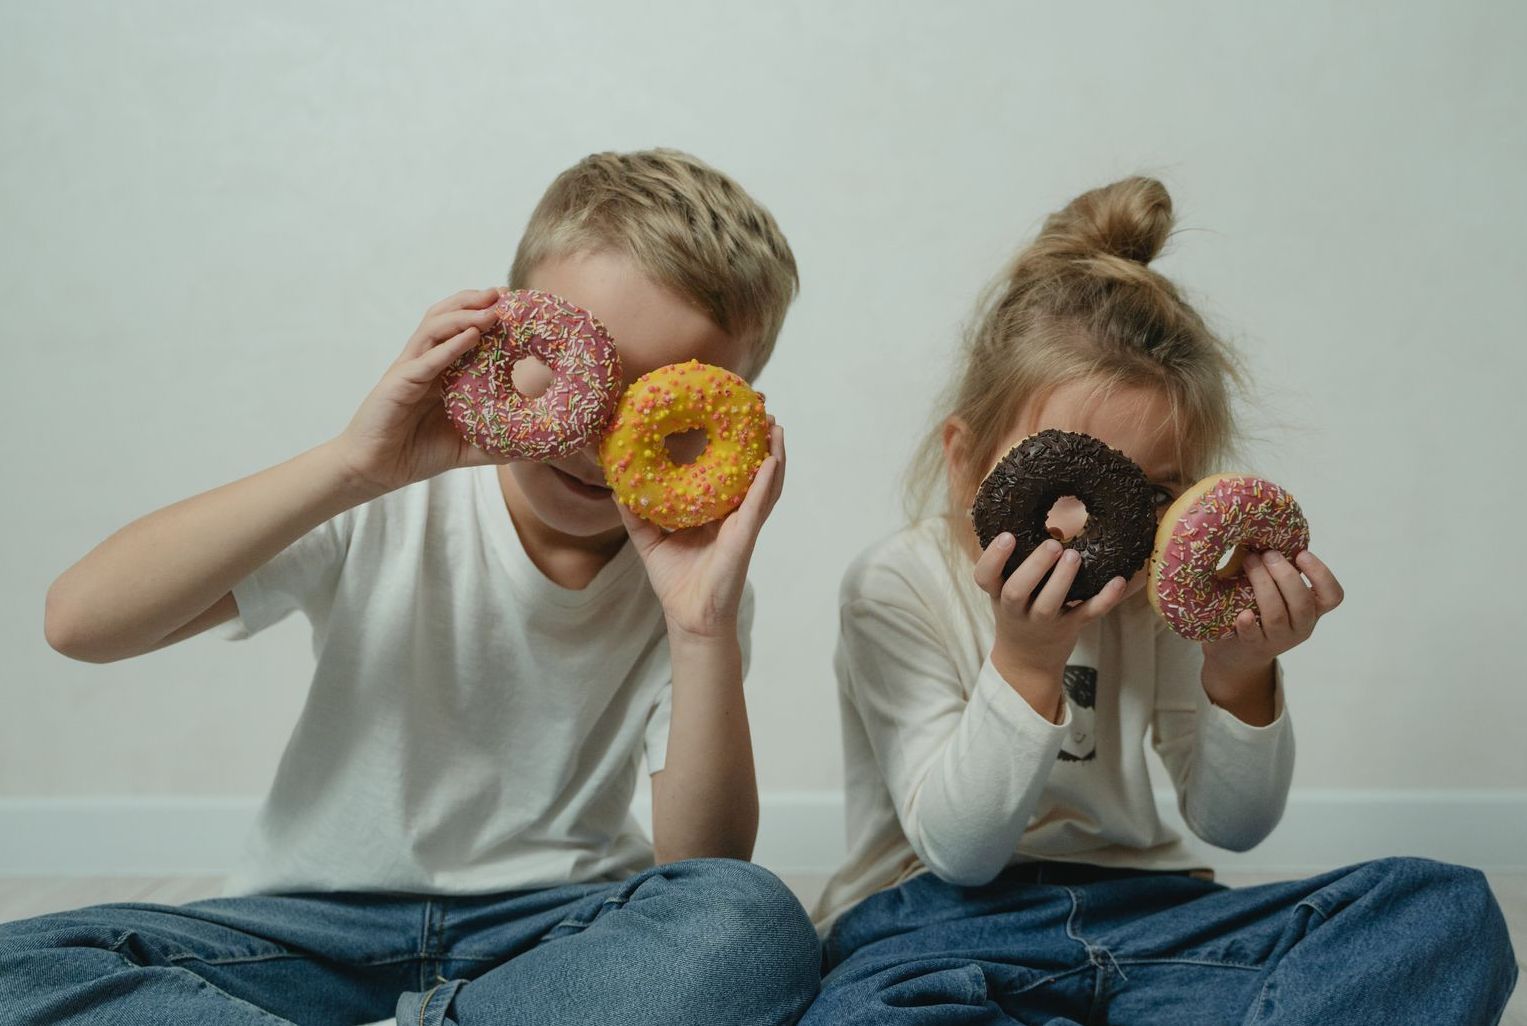 Two smiling children being foolish as they hold doughnuts over their eyes